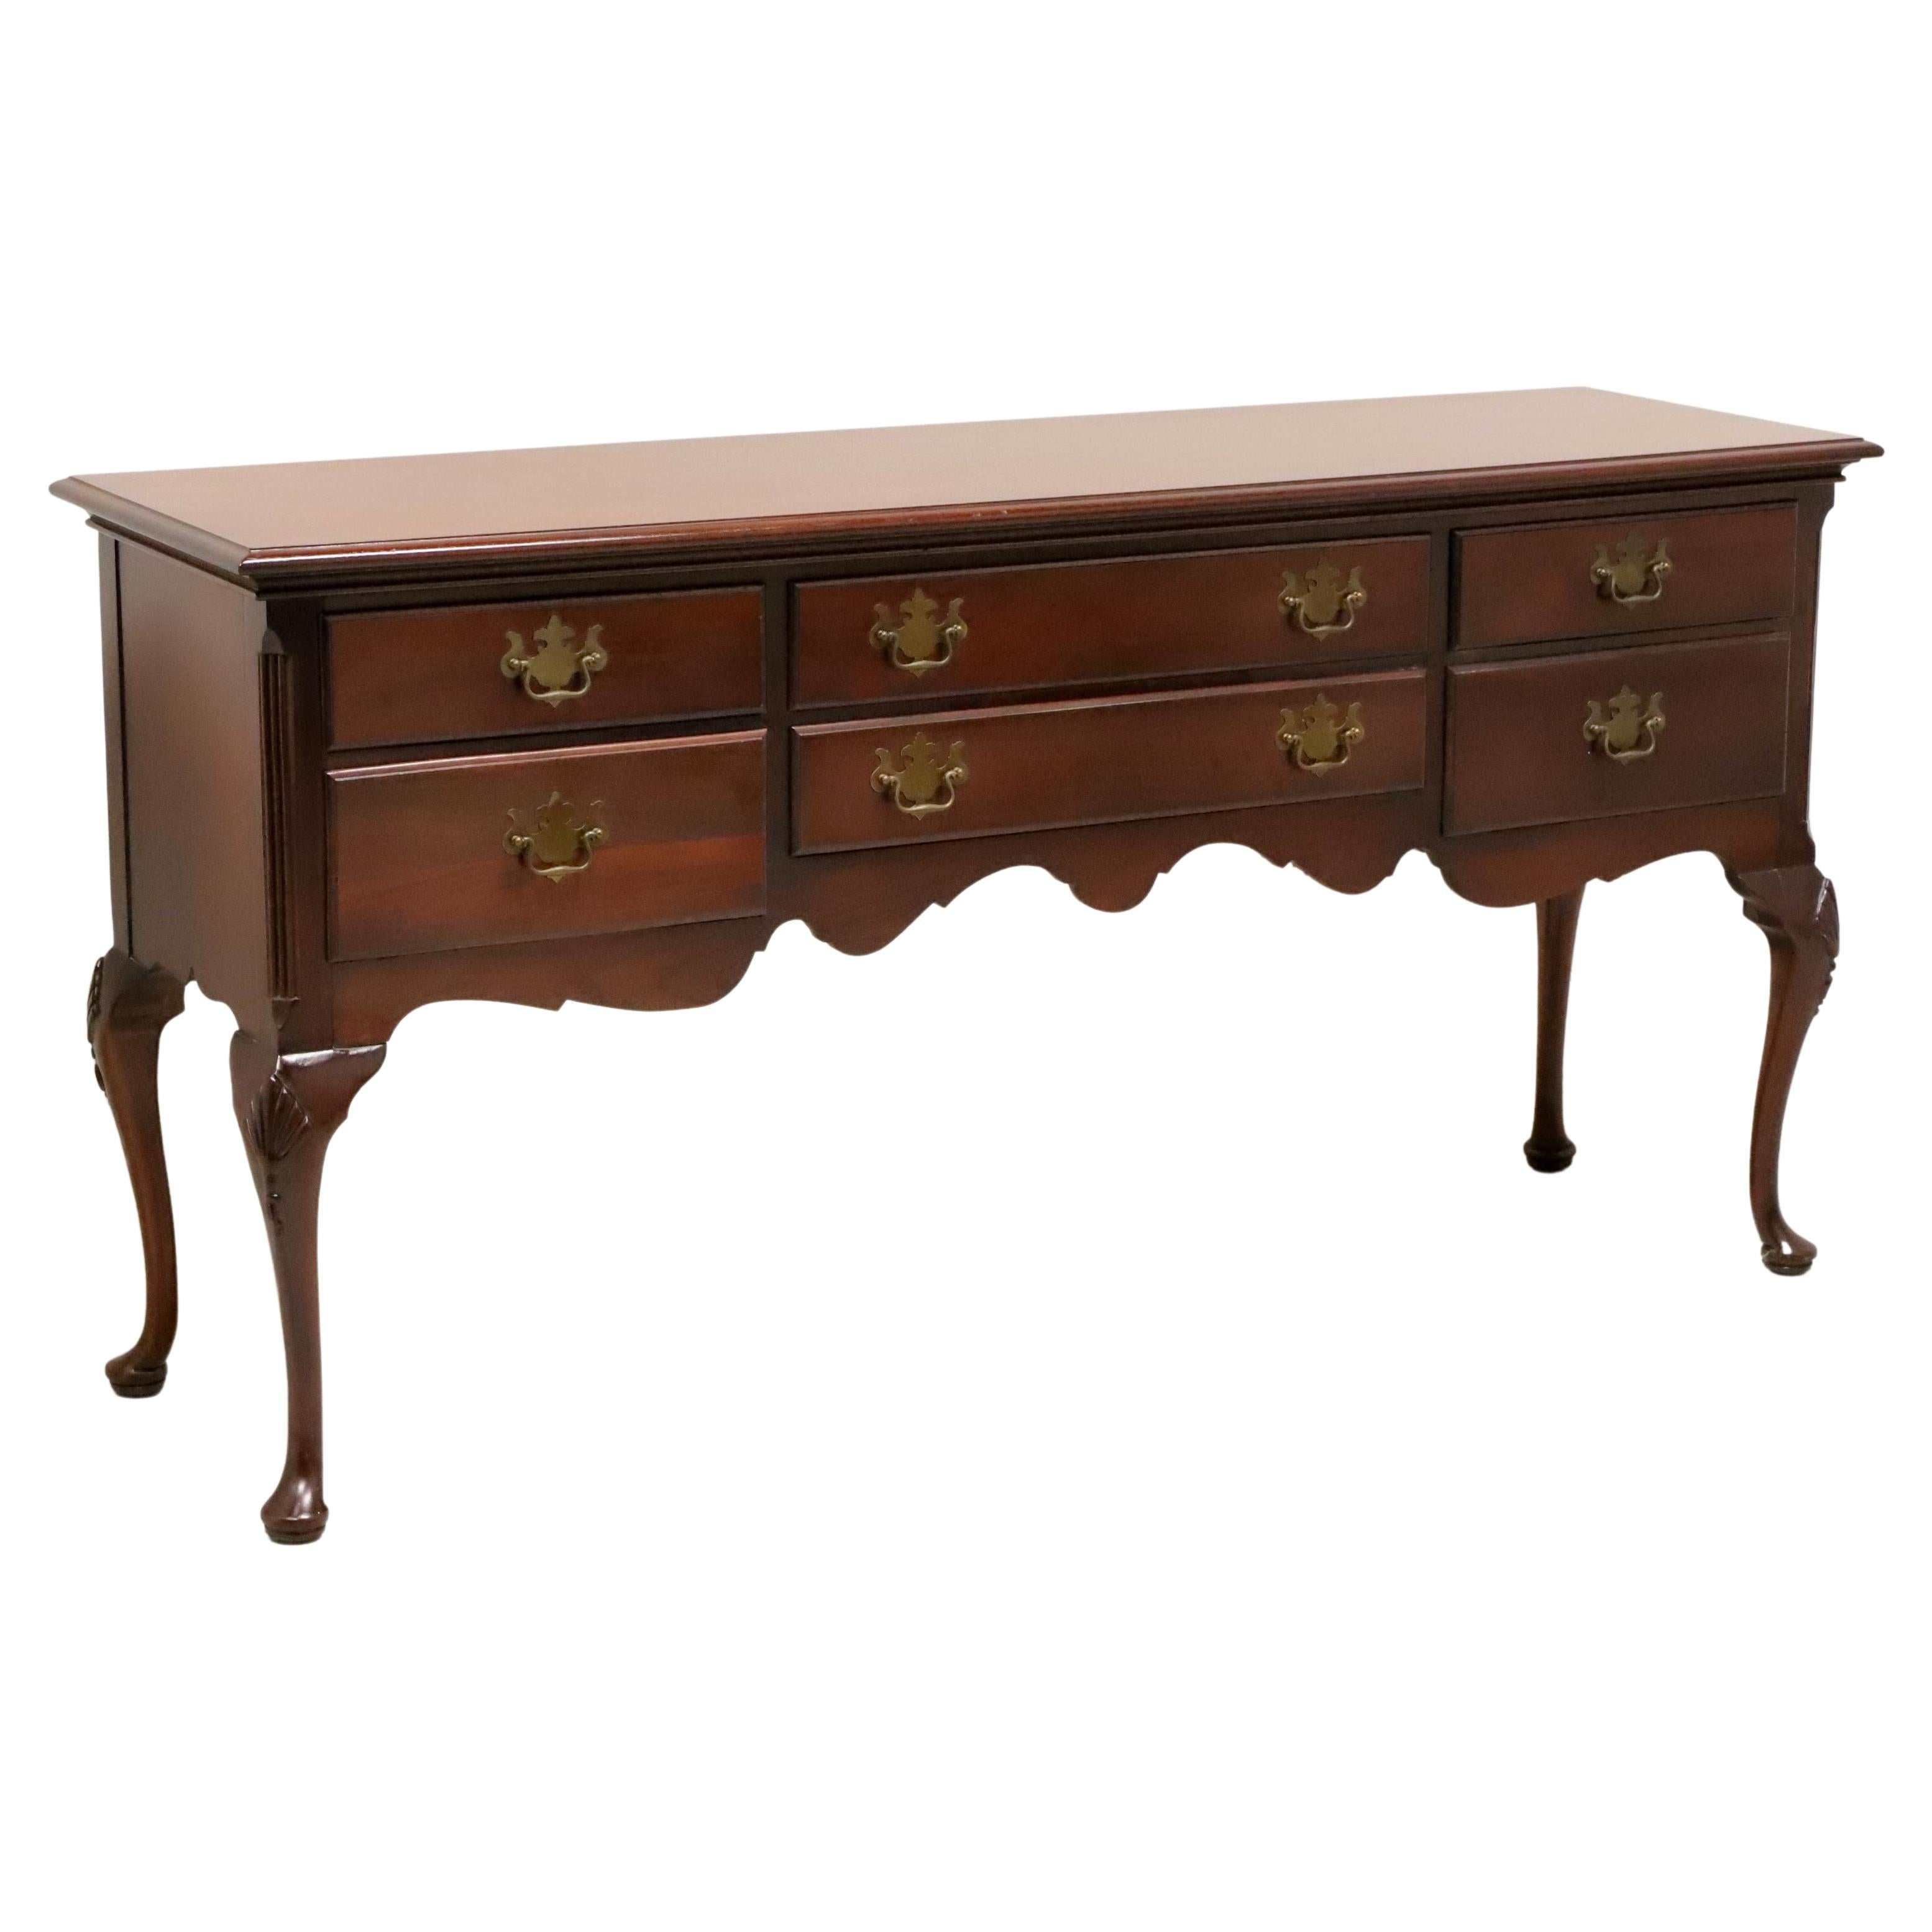 HICKORY CHAIR James River Plantations Mahogany Queen Anne Huntboard Sideboard For Sale